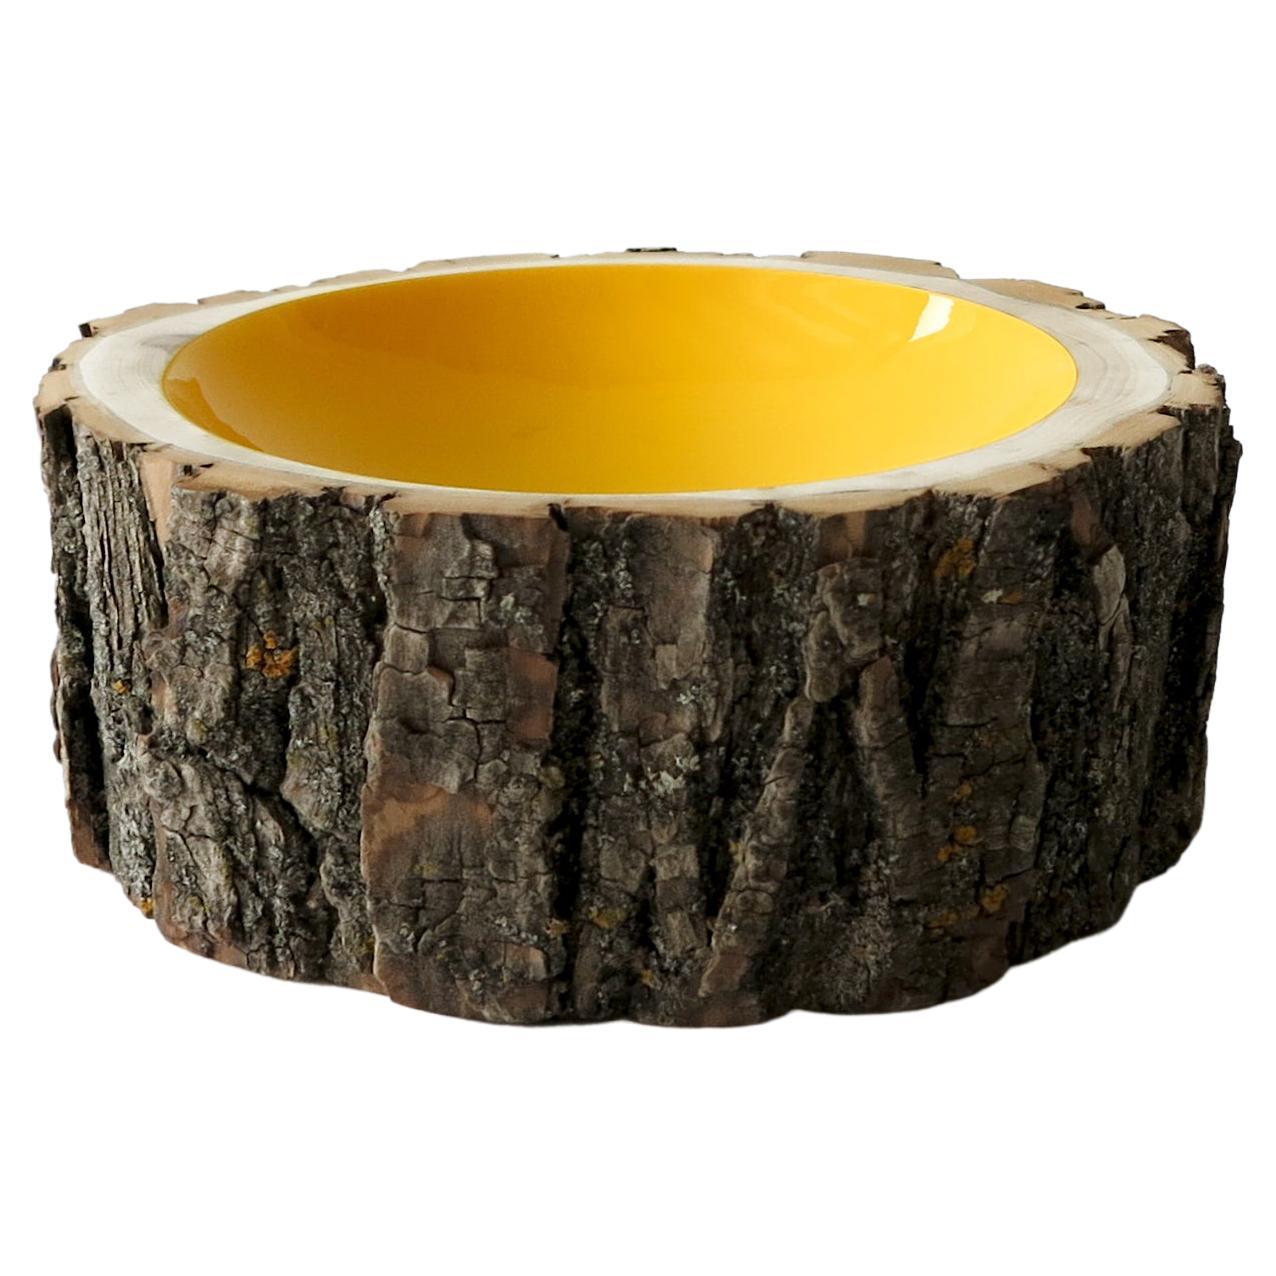 Lemon Size 8 Log Bowl by Loyal Loot Made to Order Hand Made from Reclaimed Wood For Sale